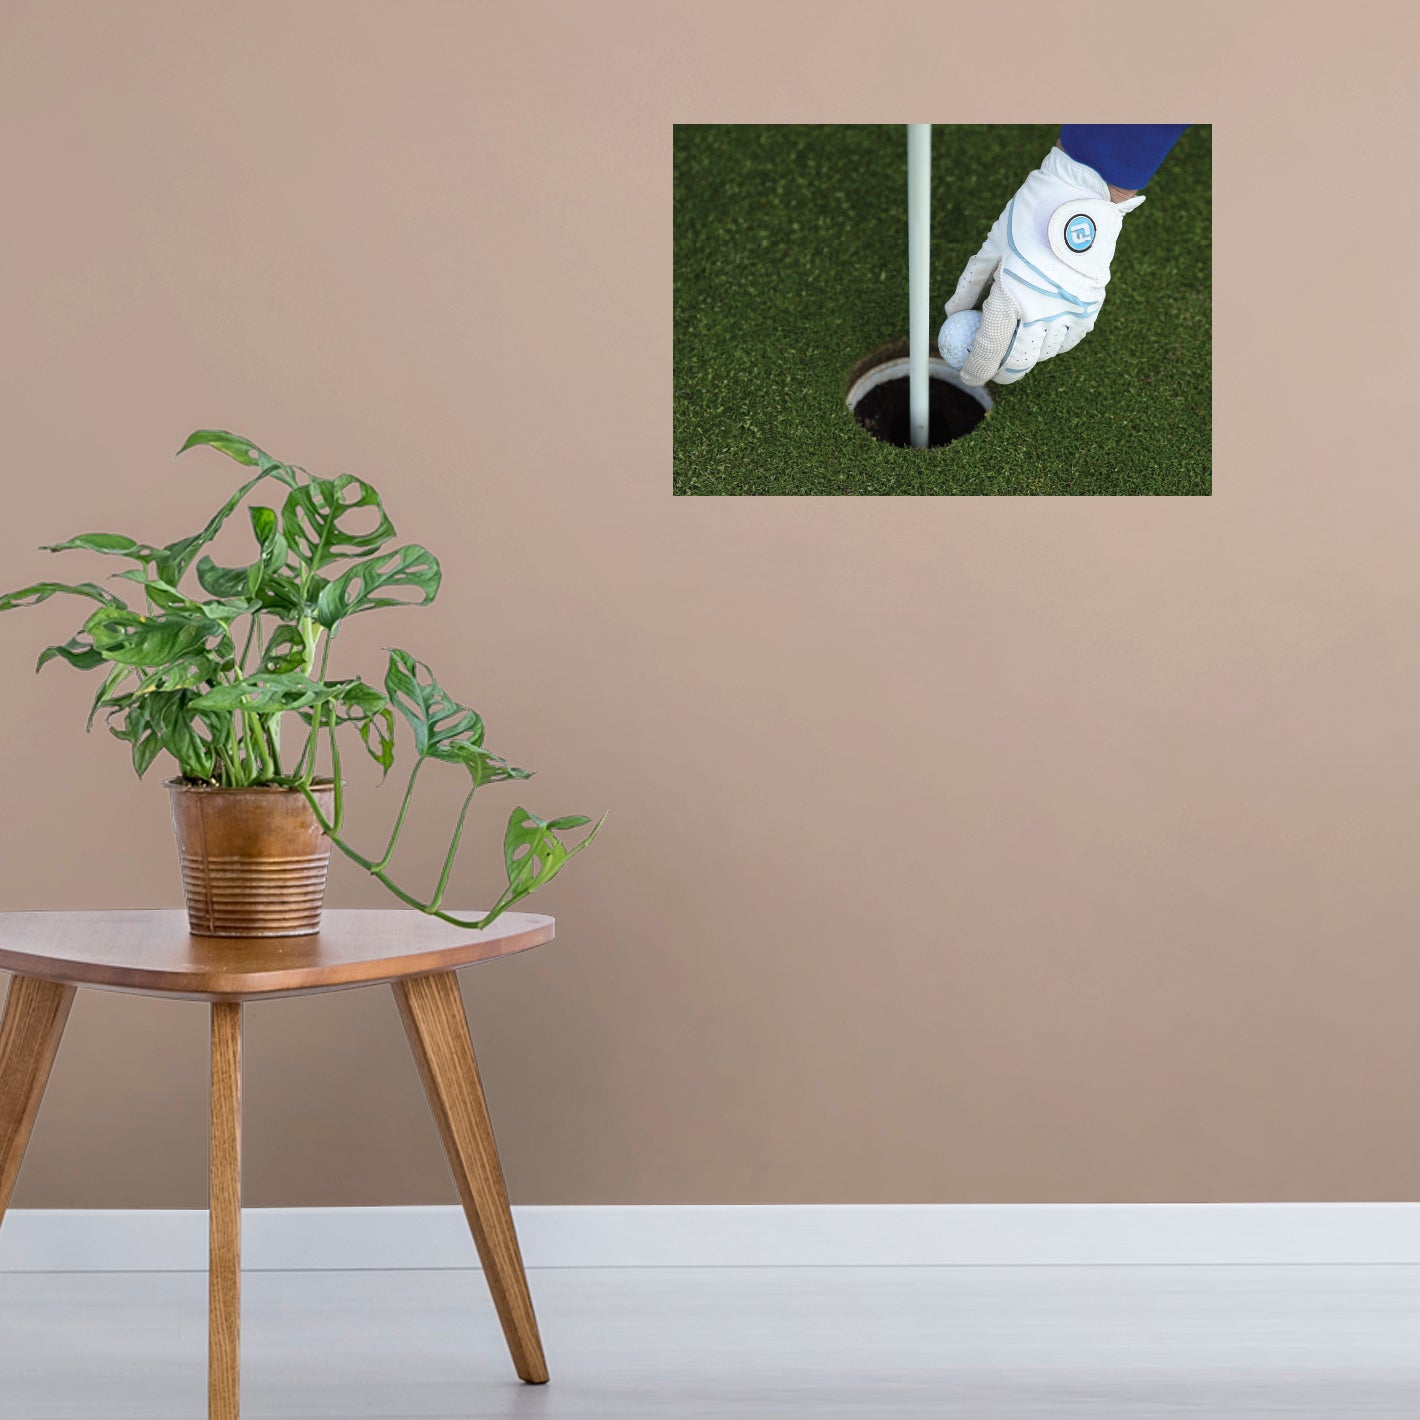 Golf: Glove Poster - Removable Adhesive Decal